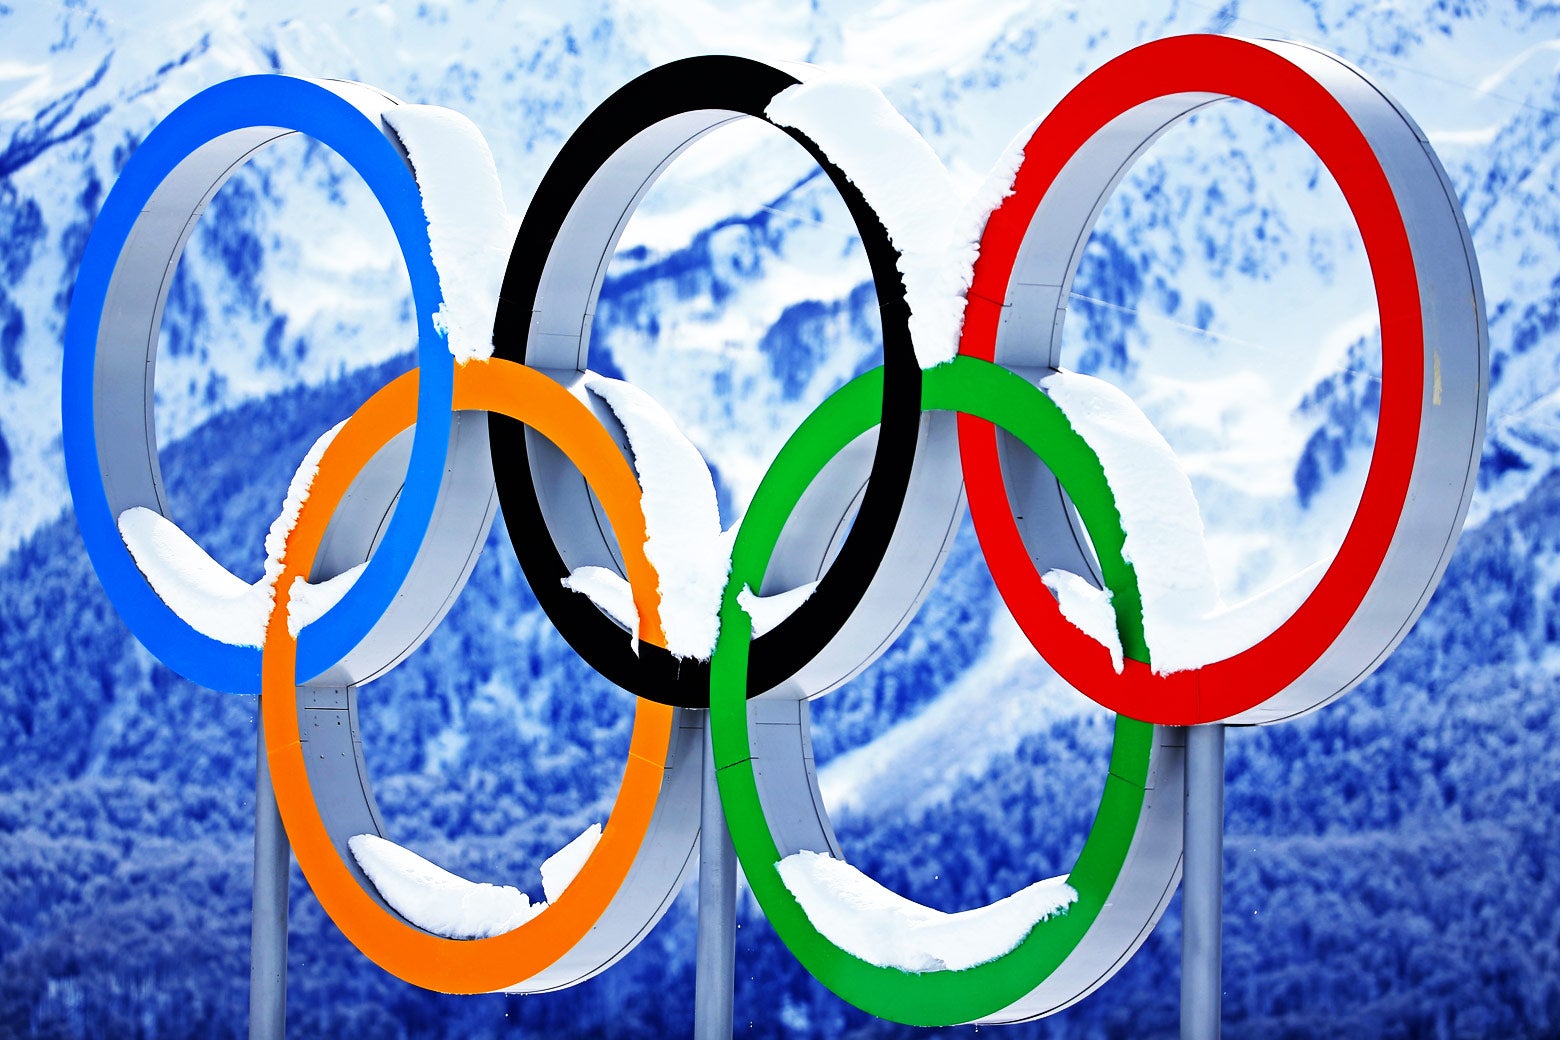 Snow collects on the Olympic Rings on the 12th day of the 2014 Sochi Winter Olympics at Laura Cross-Country Ski & Biathlon Center on Feb. 19, 2014, in Sochi, Russia.